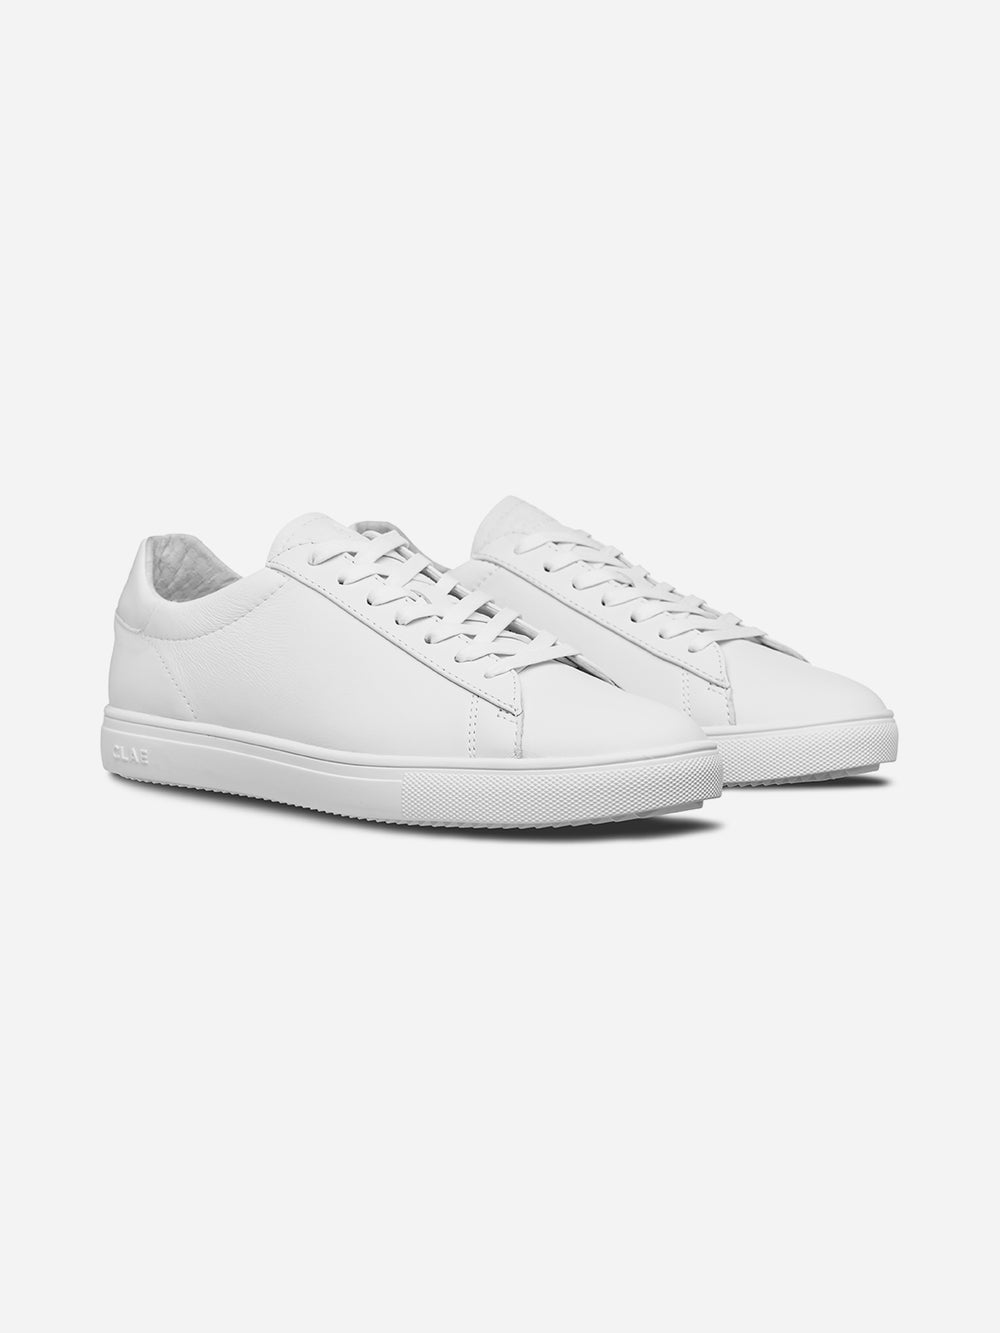 Triple White Leather Bradley Essentials Mens and Womens Clae Summer Sneakers